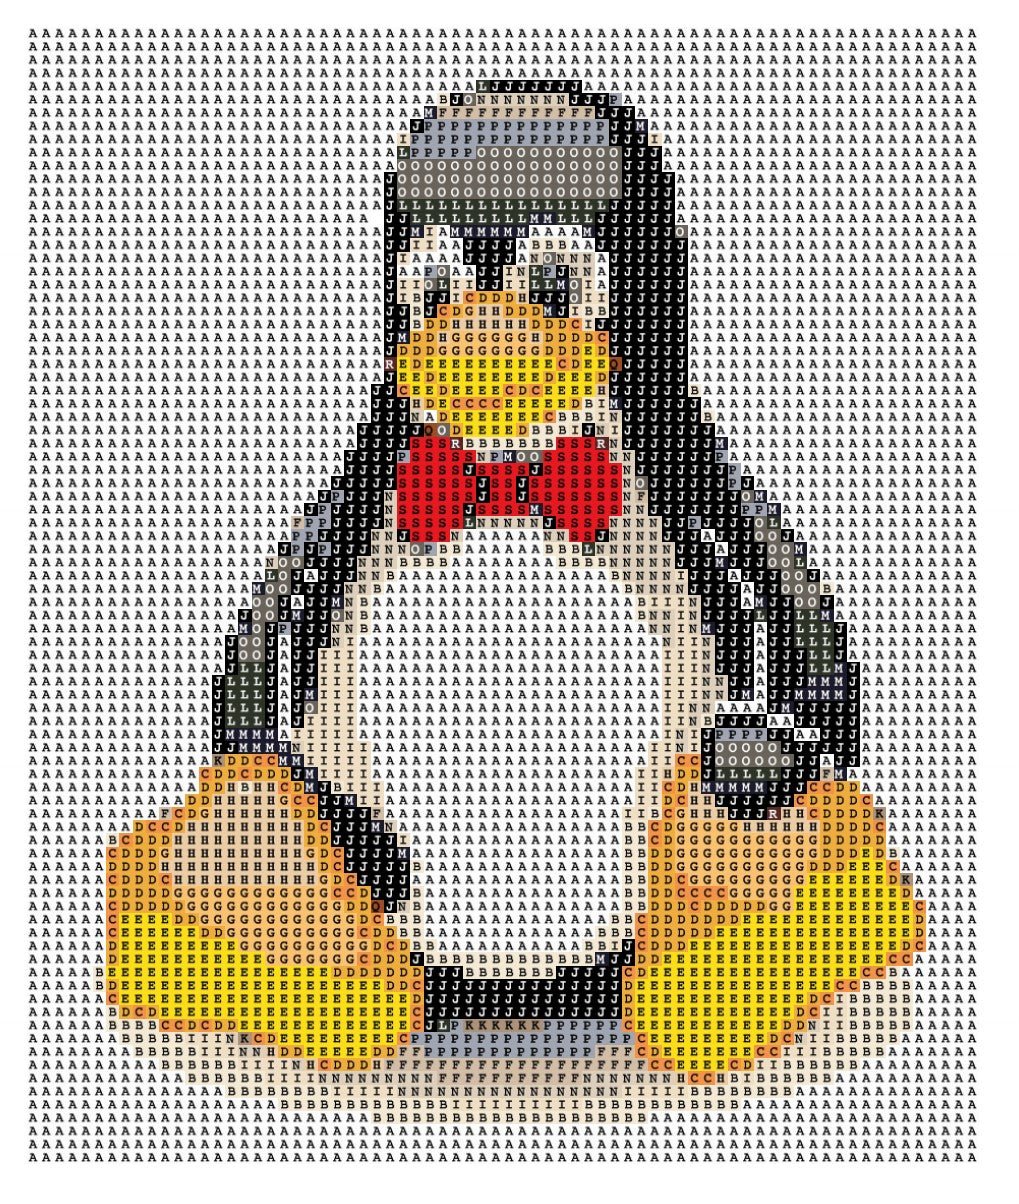 Penguin Diamond Painting Printable Pattern - Round - Art by Sals - A Homespun Hobby